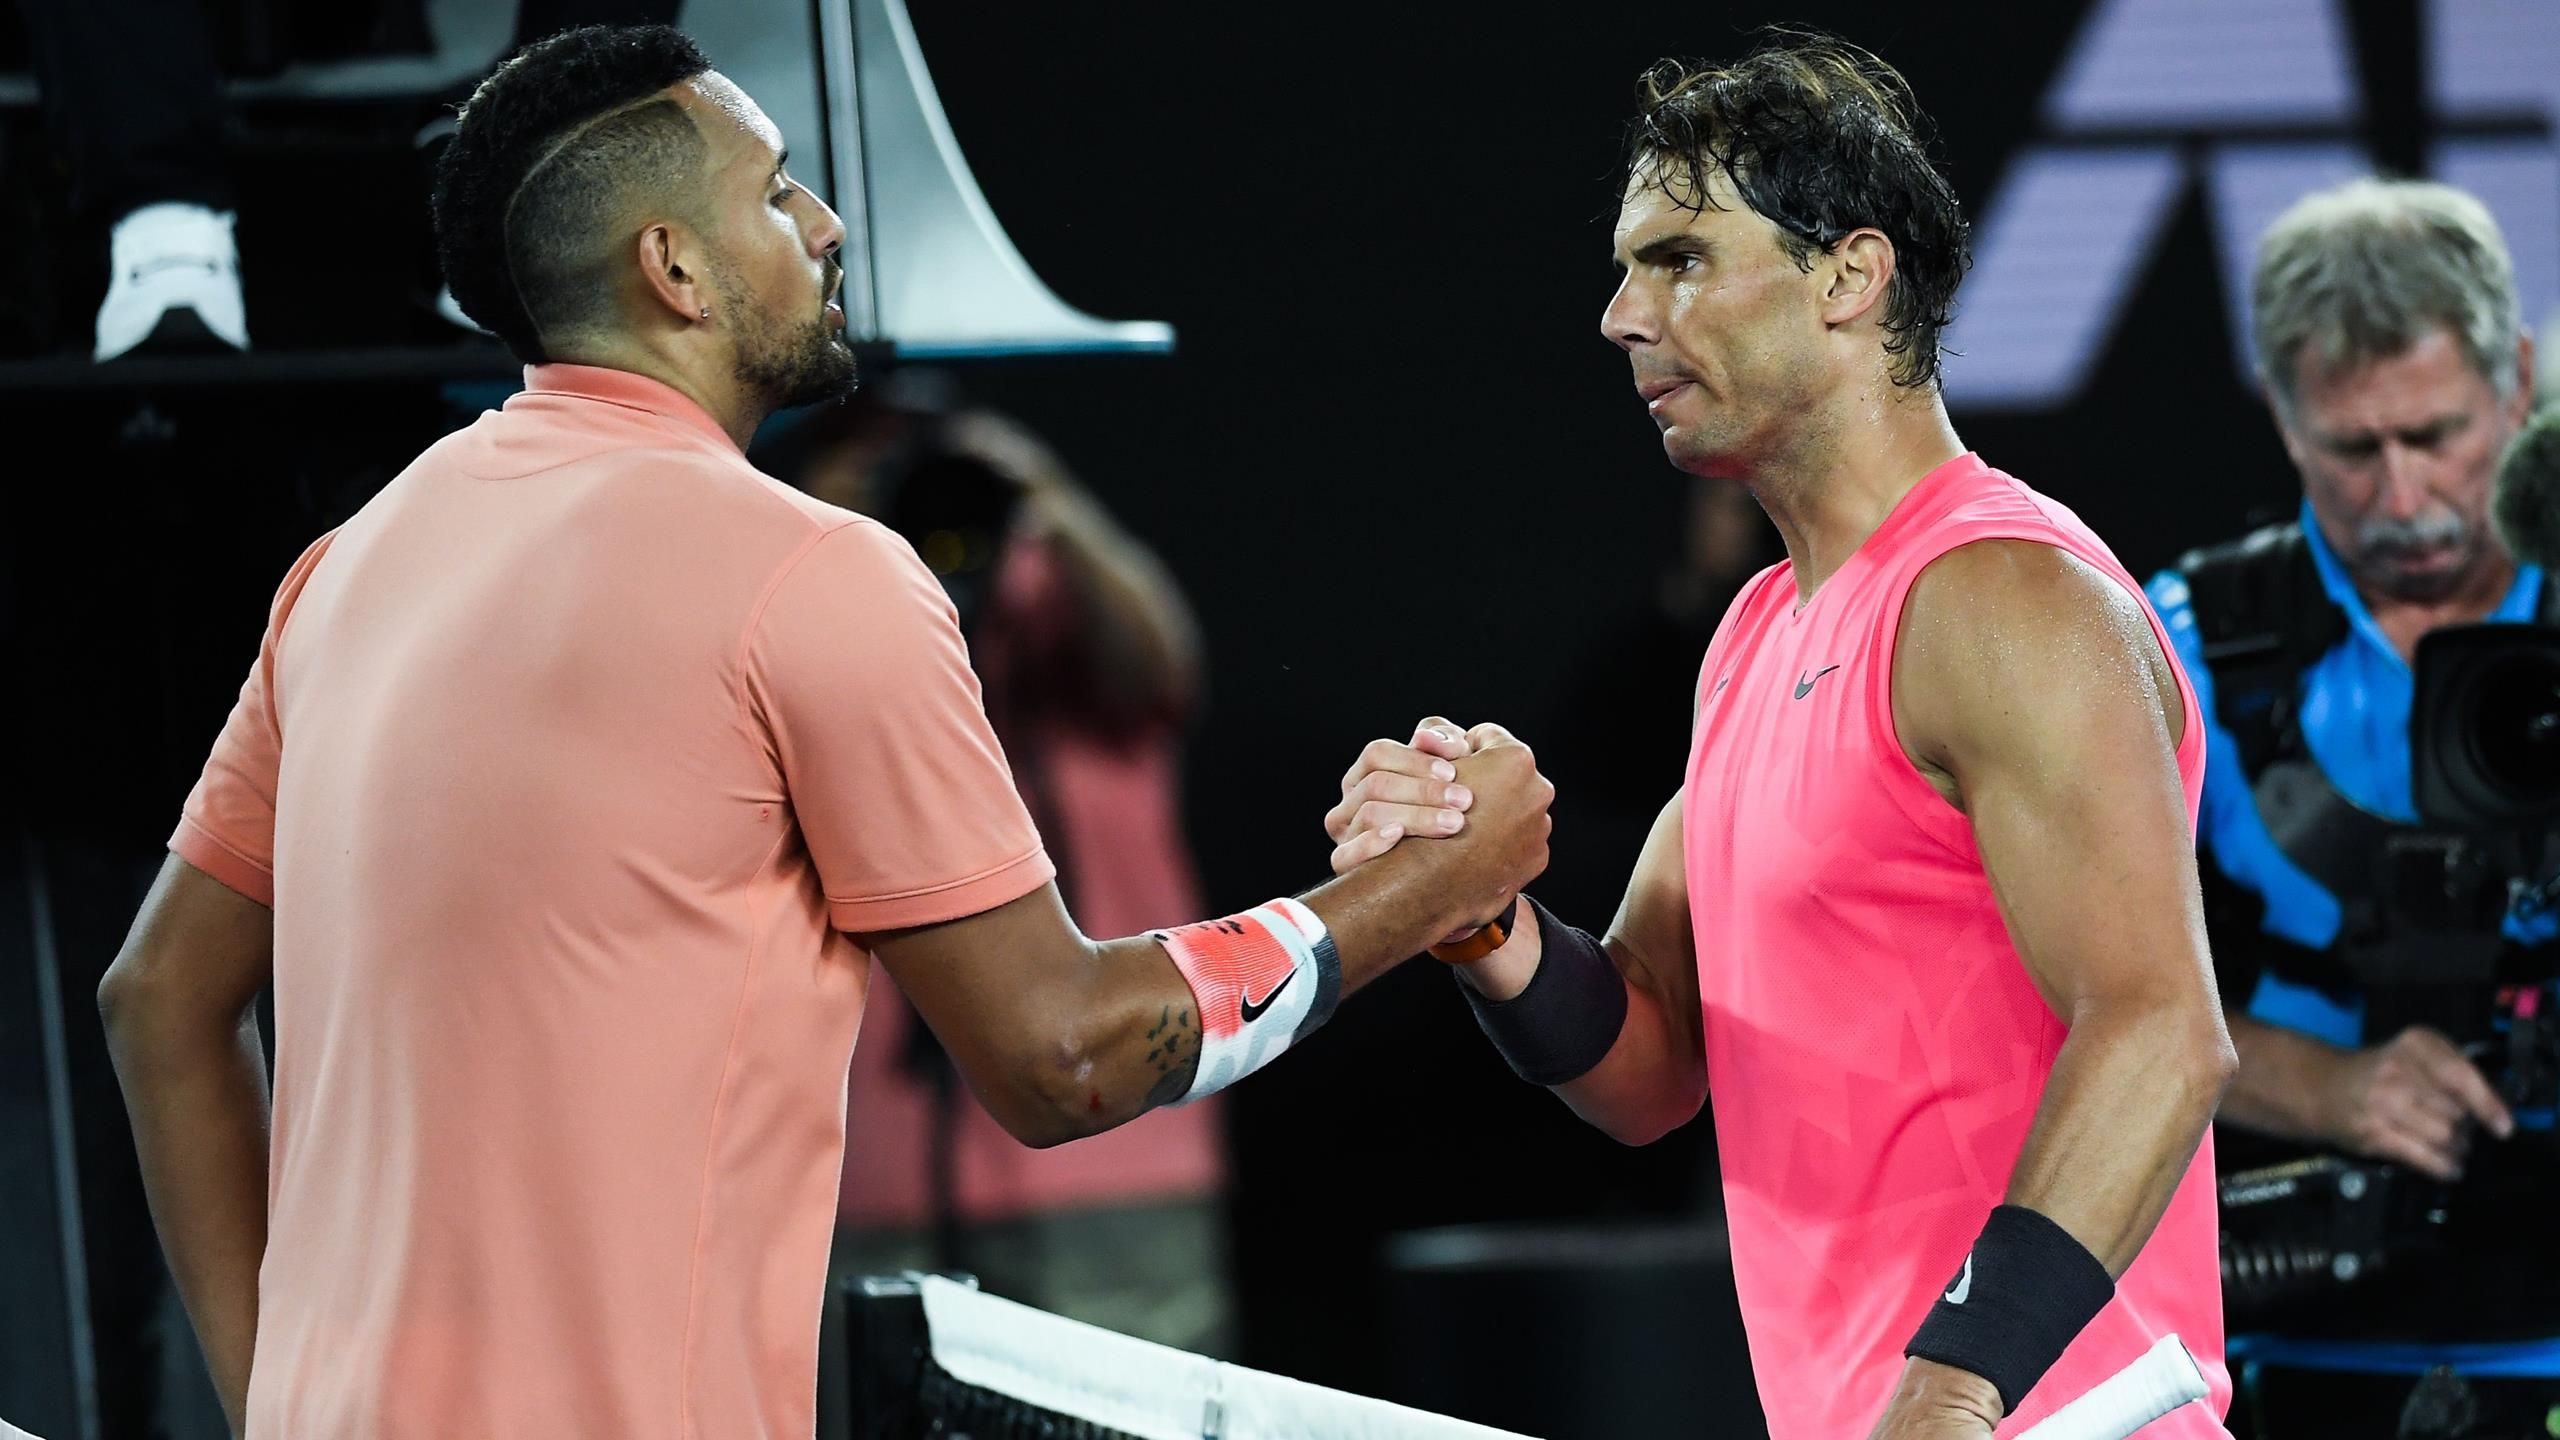 Rafael Nadal praises Nick Kyrgios, says he has the weapons to beat any player ahead of 2023 Australian Open